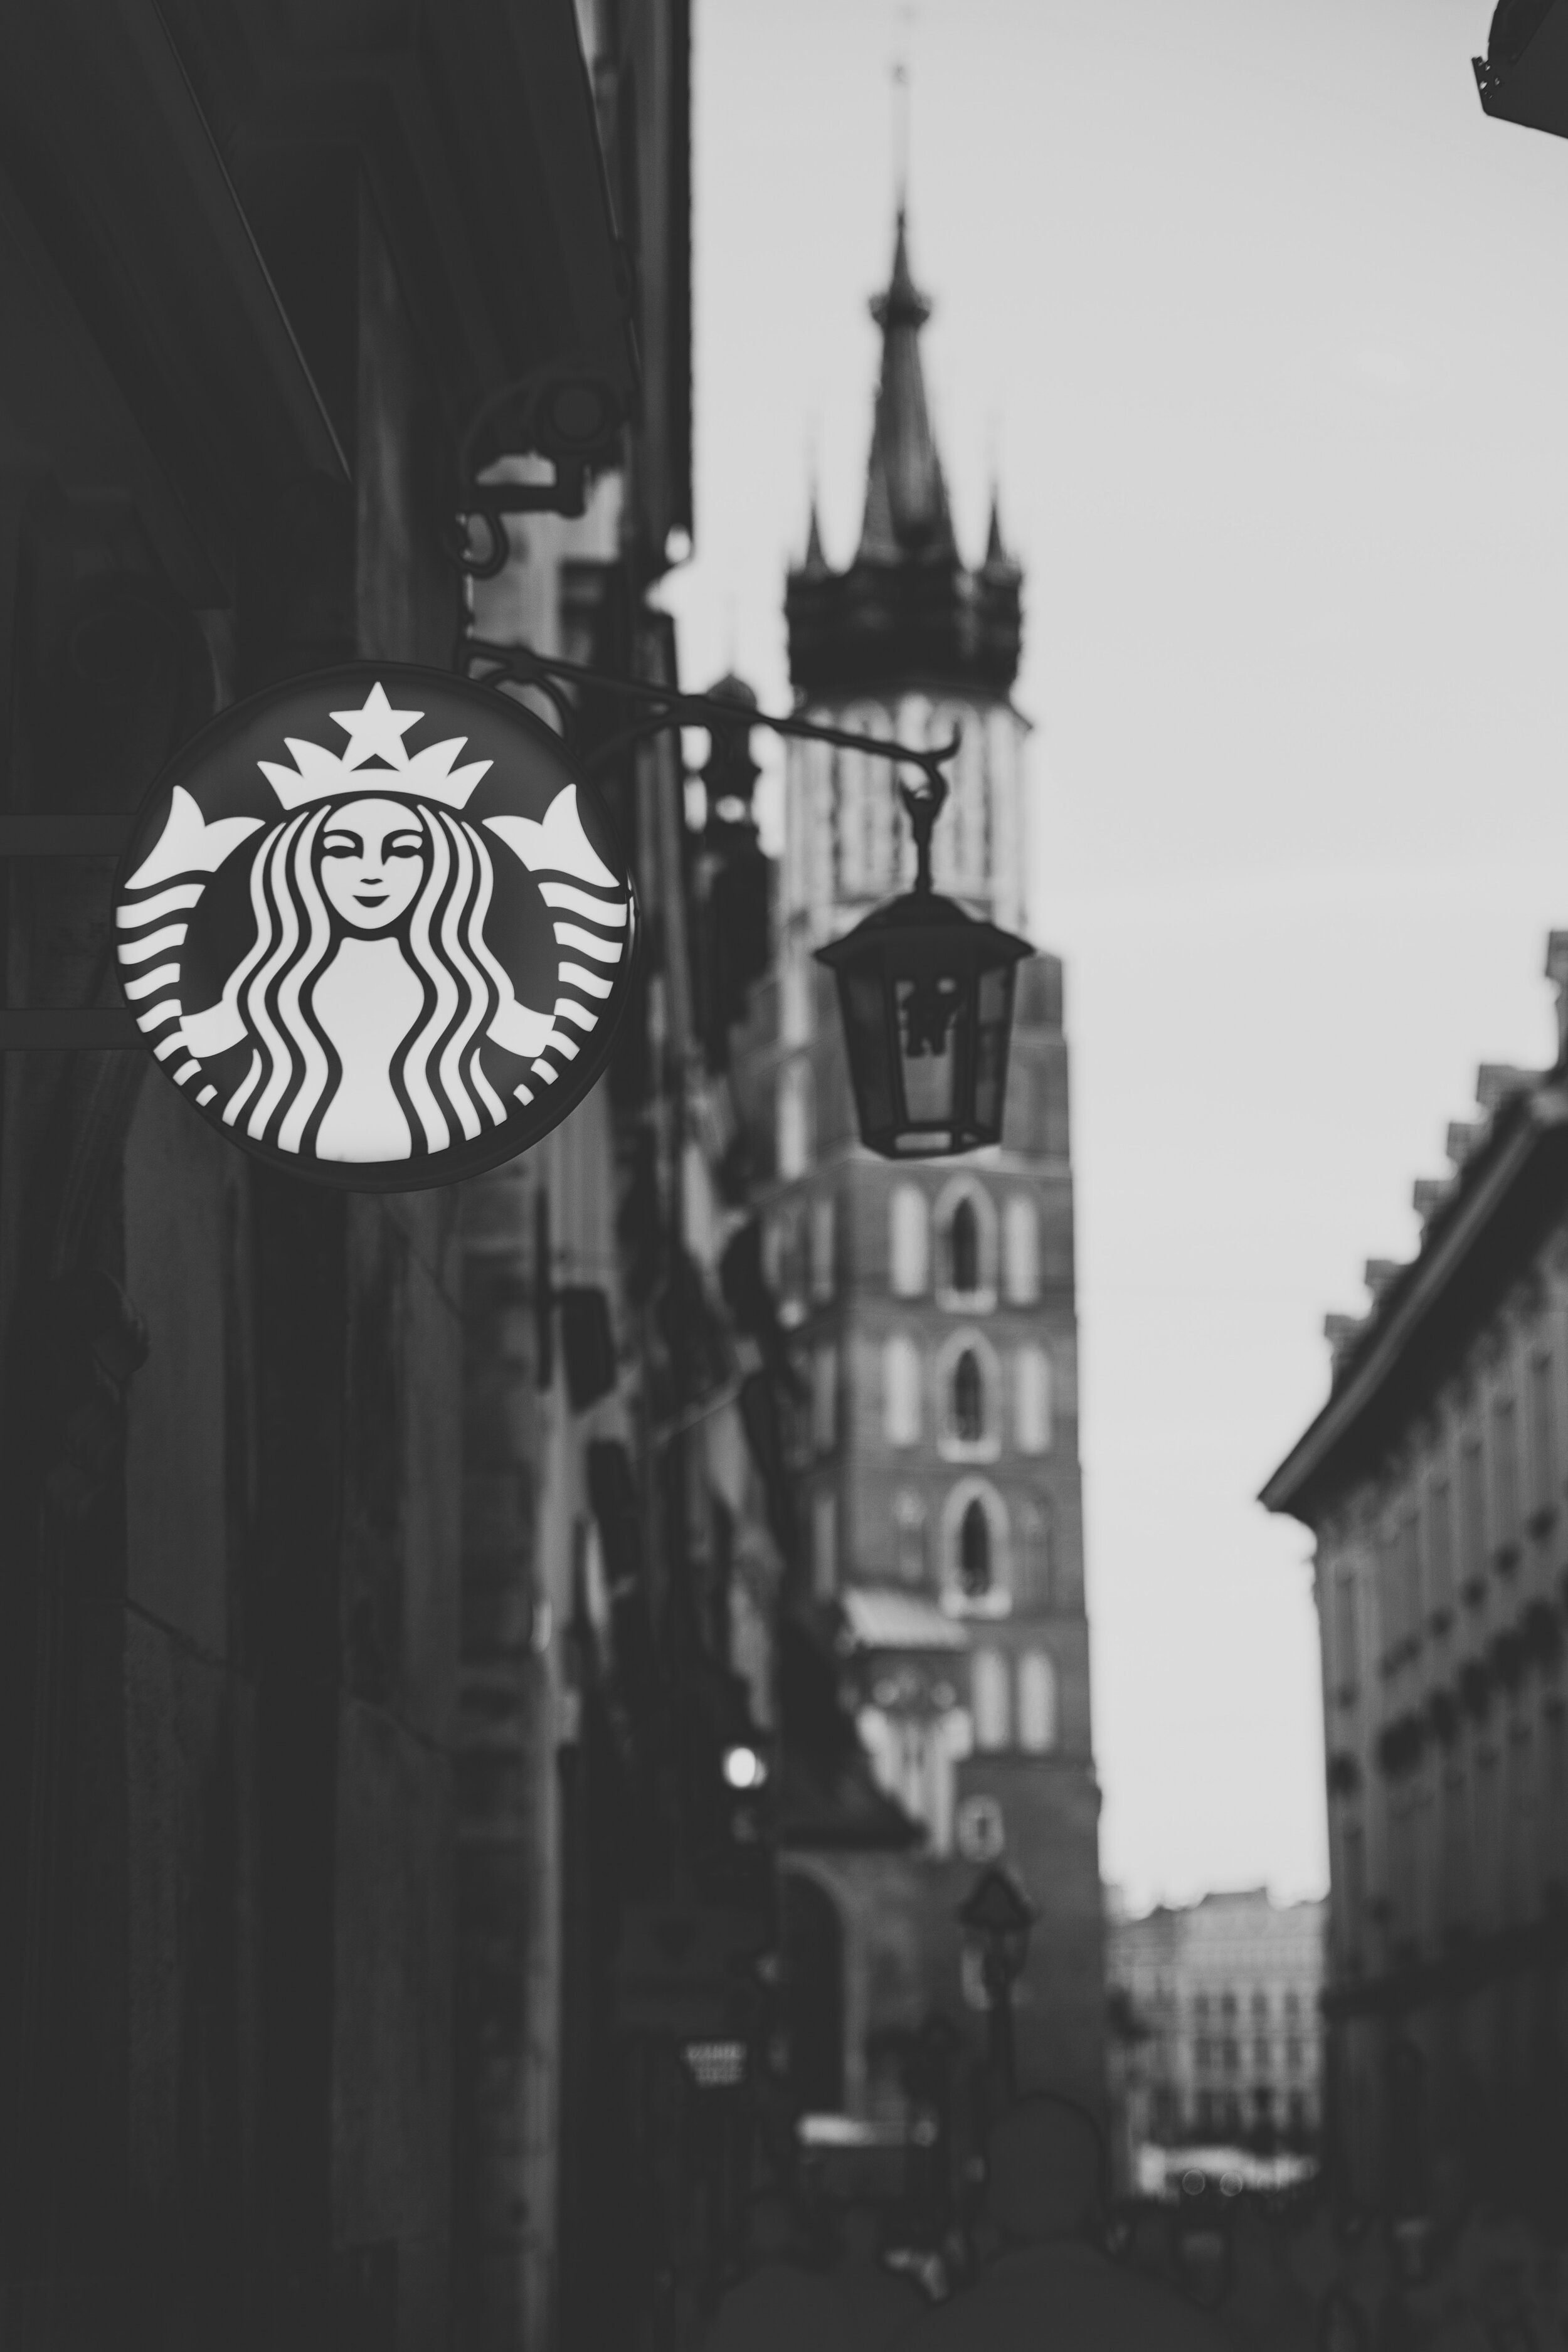 A Starbucks cafe sign hangs against a city street backdrop